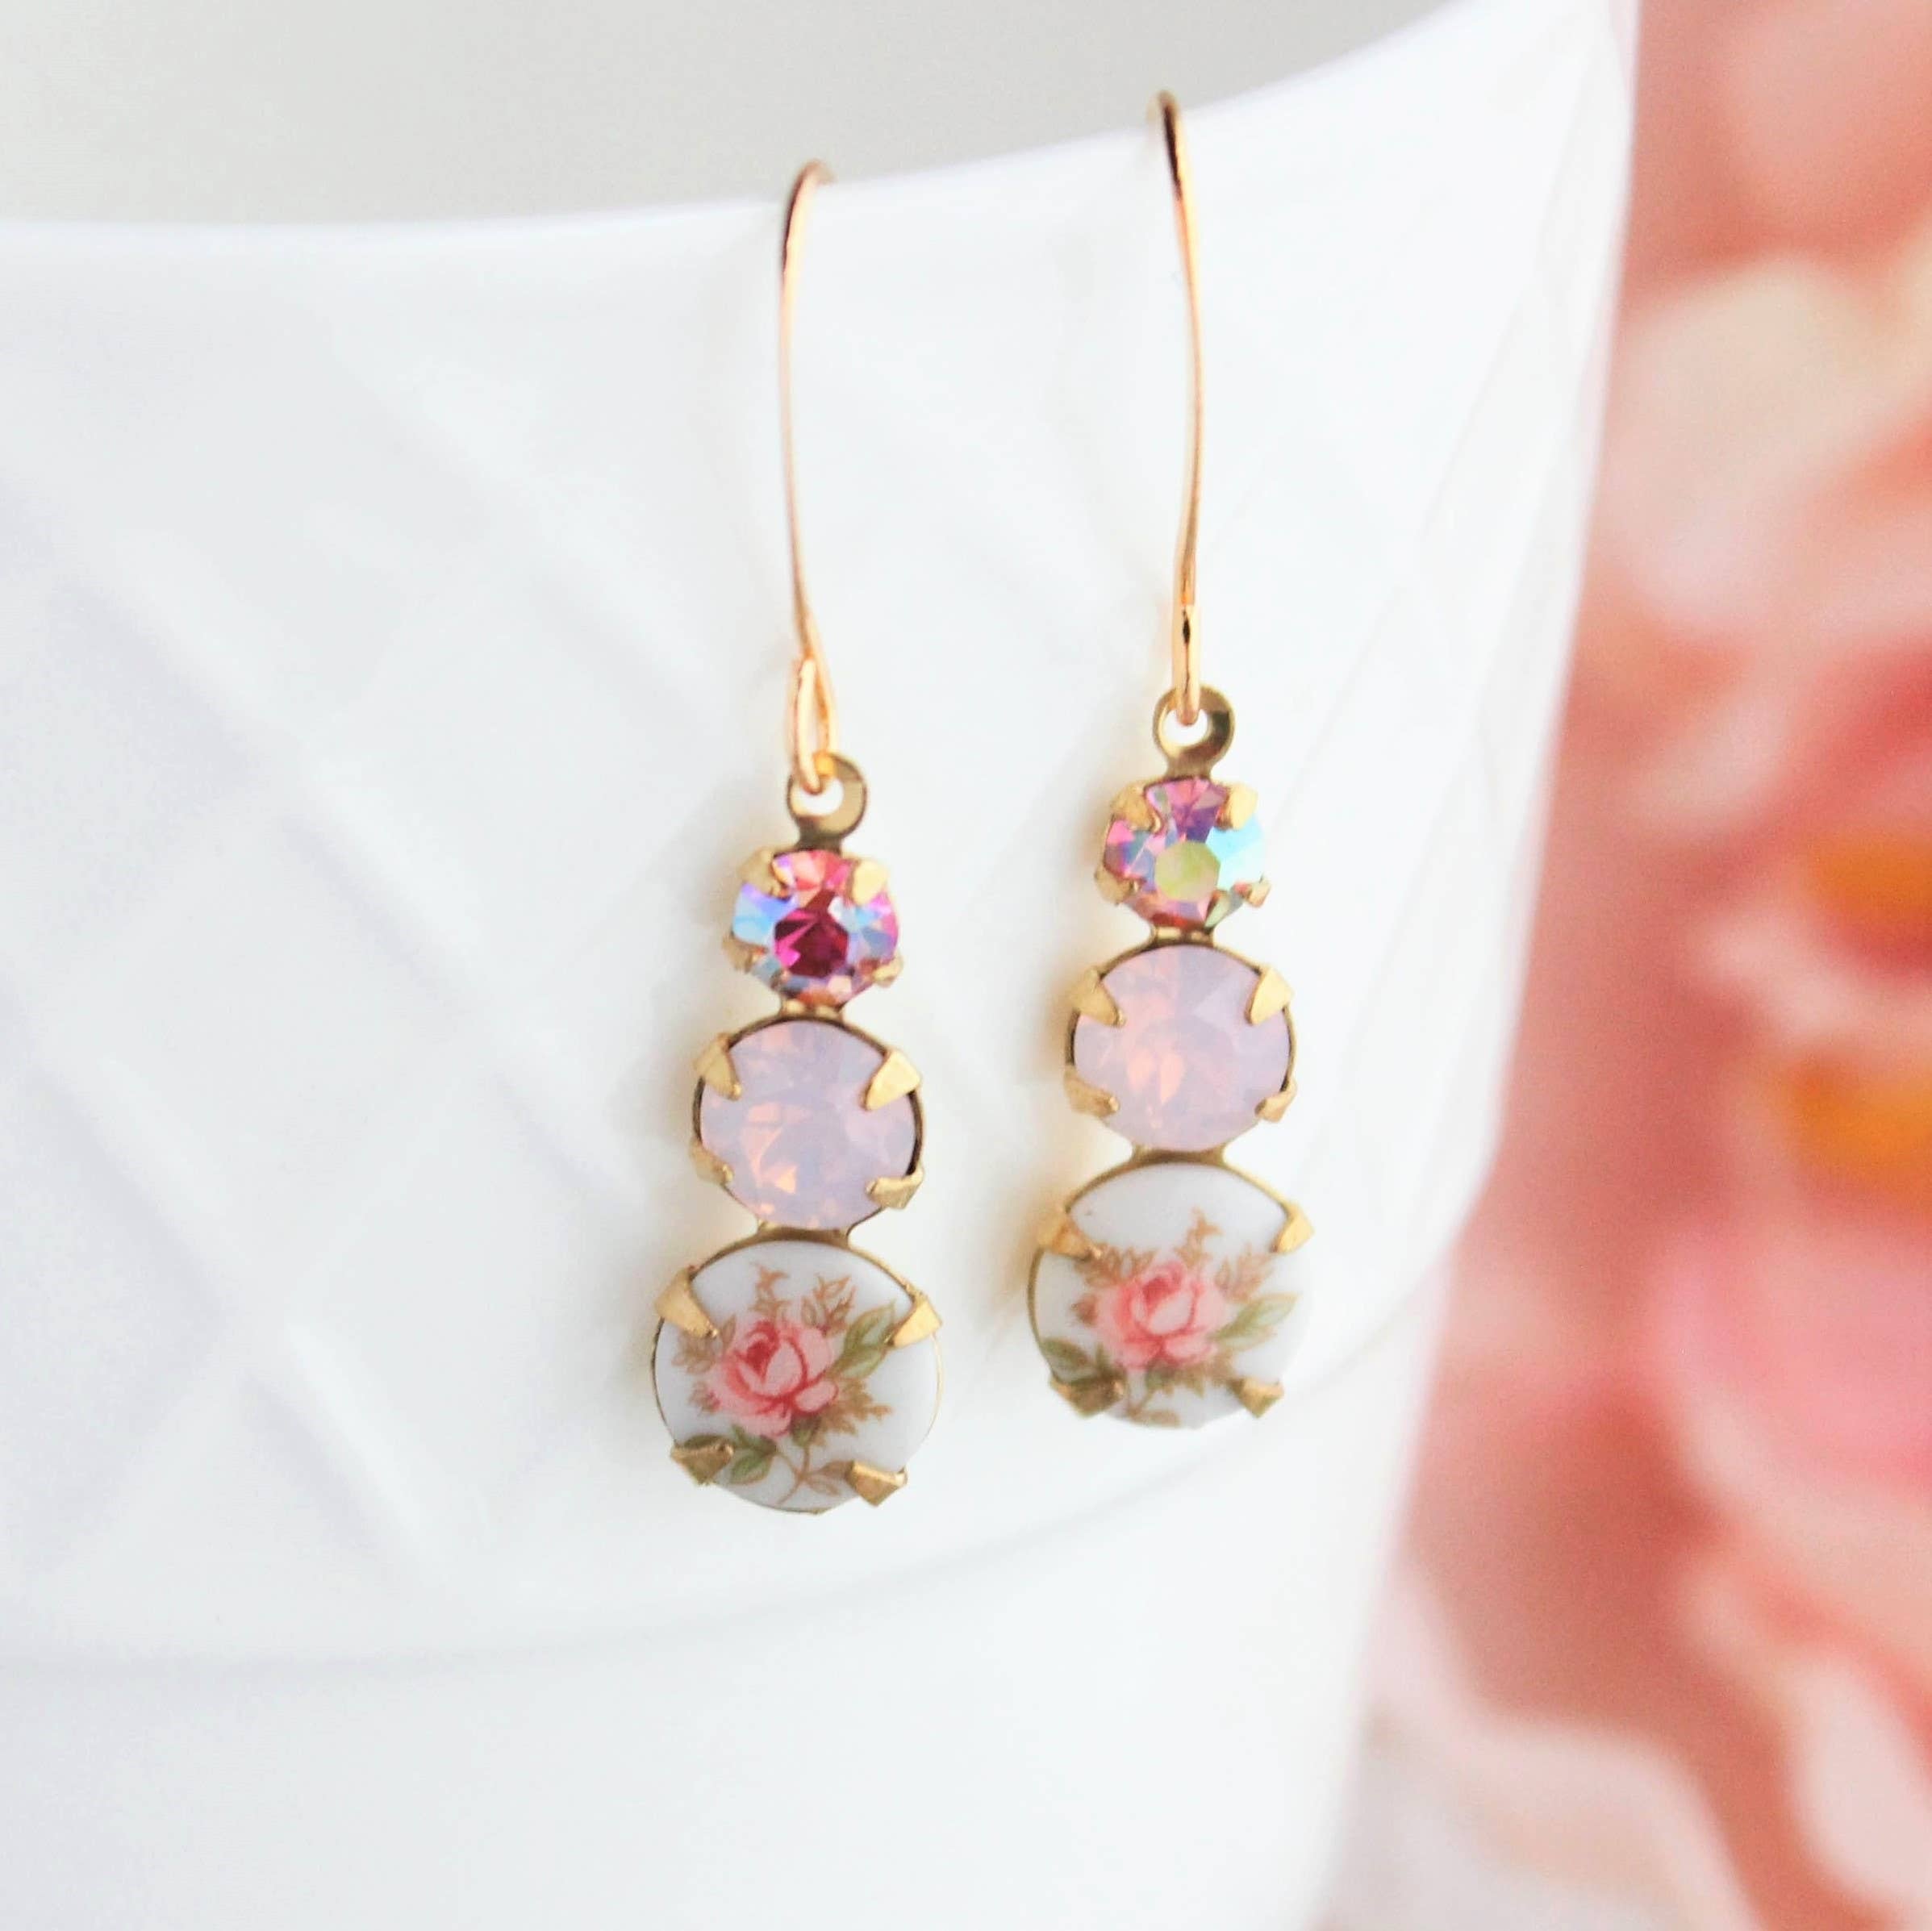 Three Jewel Earrings - Out of the Blue